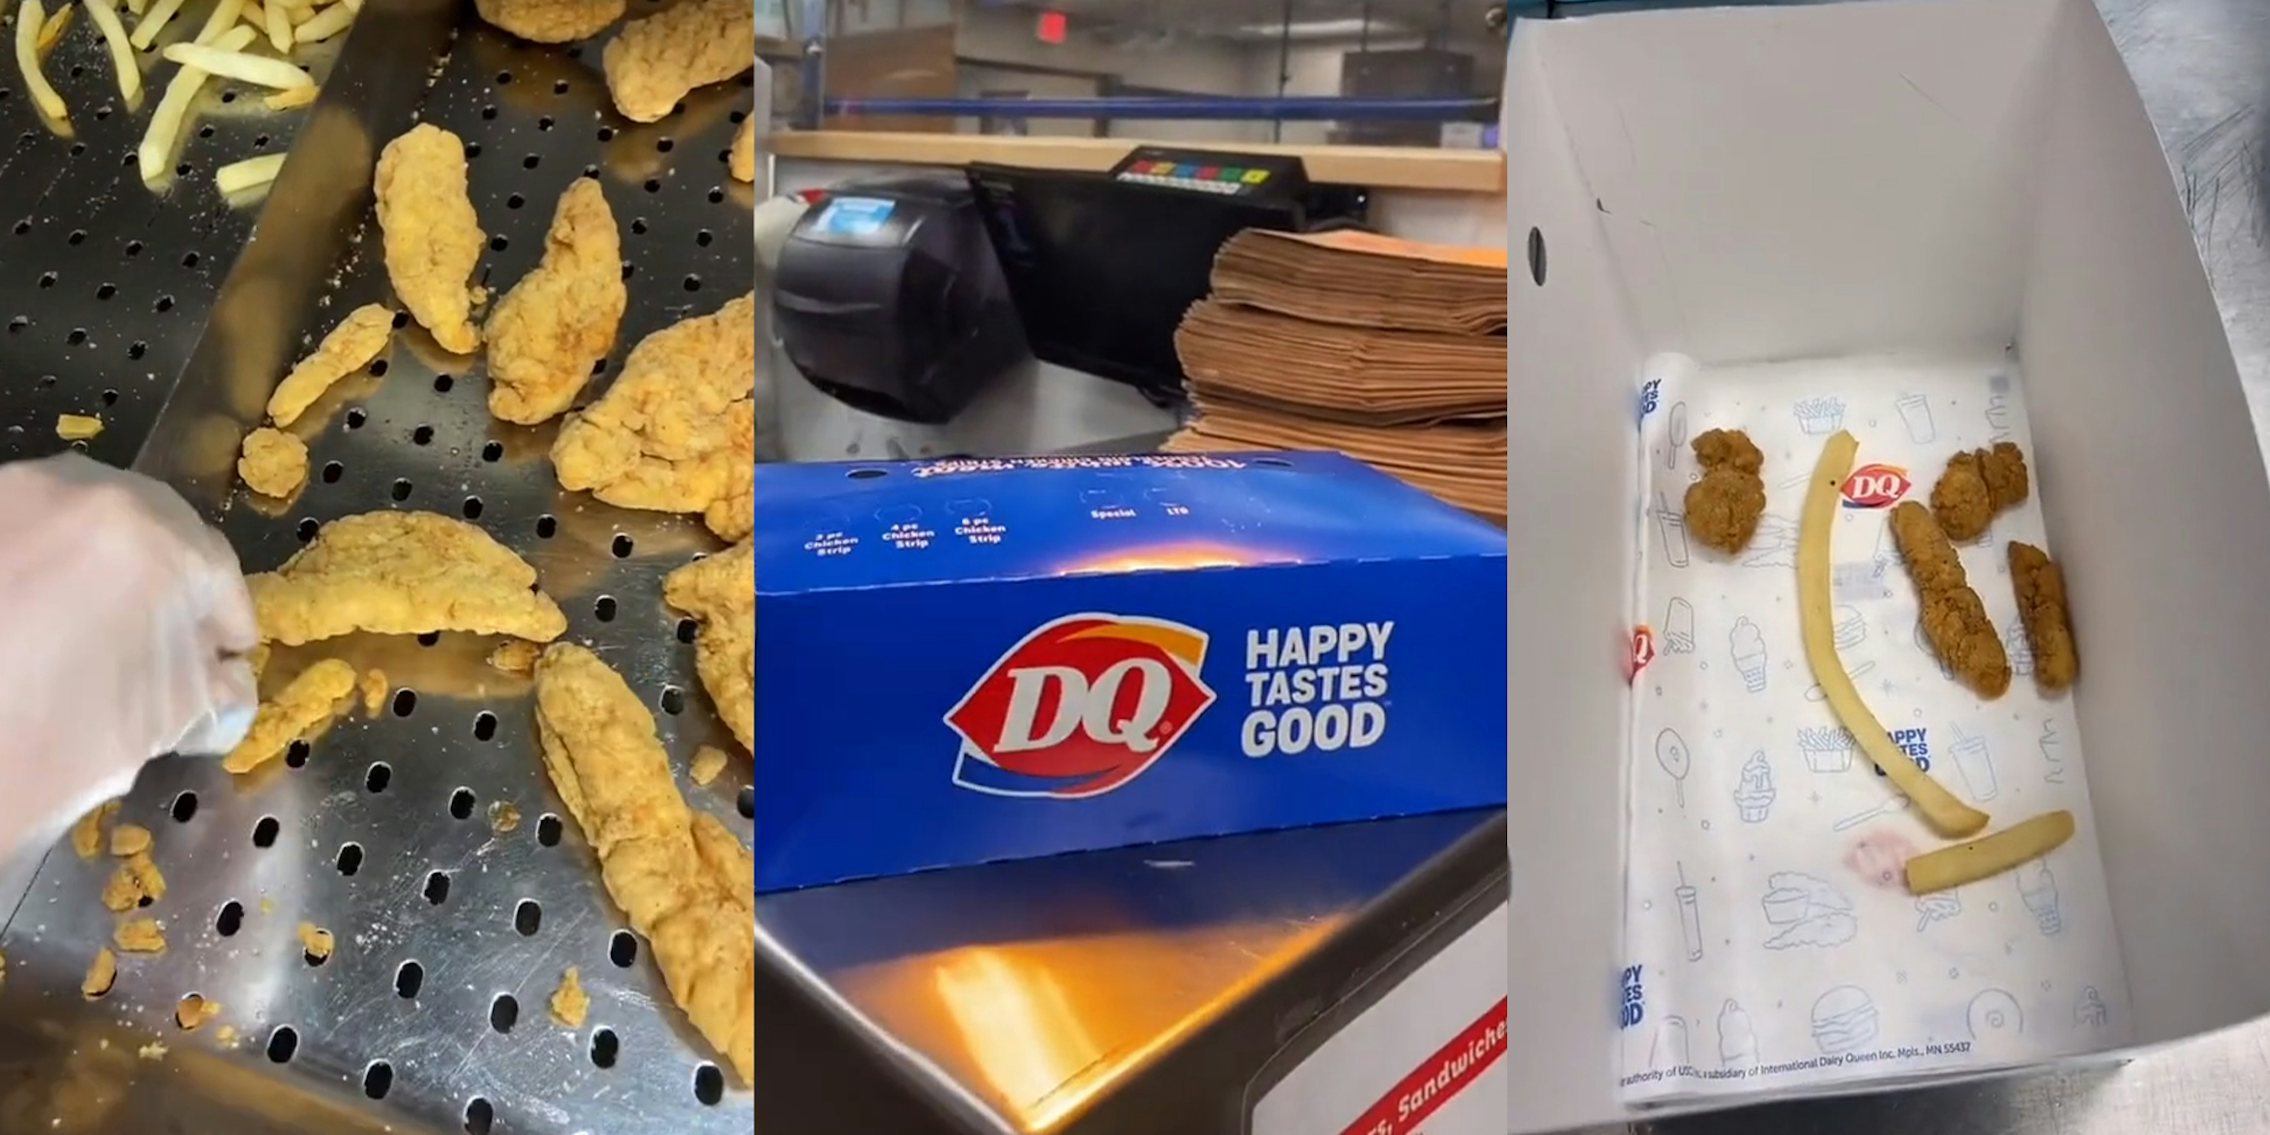 Dairy Queen worker finds the smallest chicken strips to put in the basket as payback